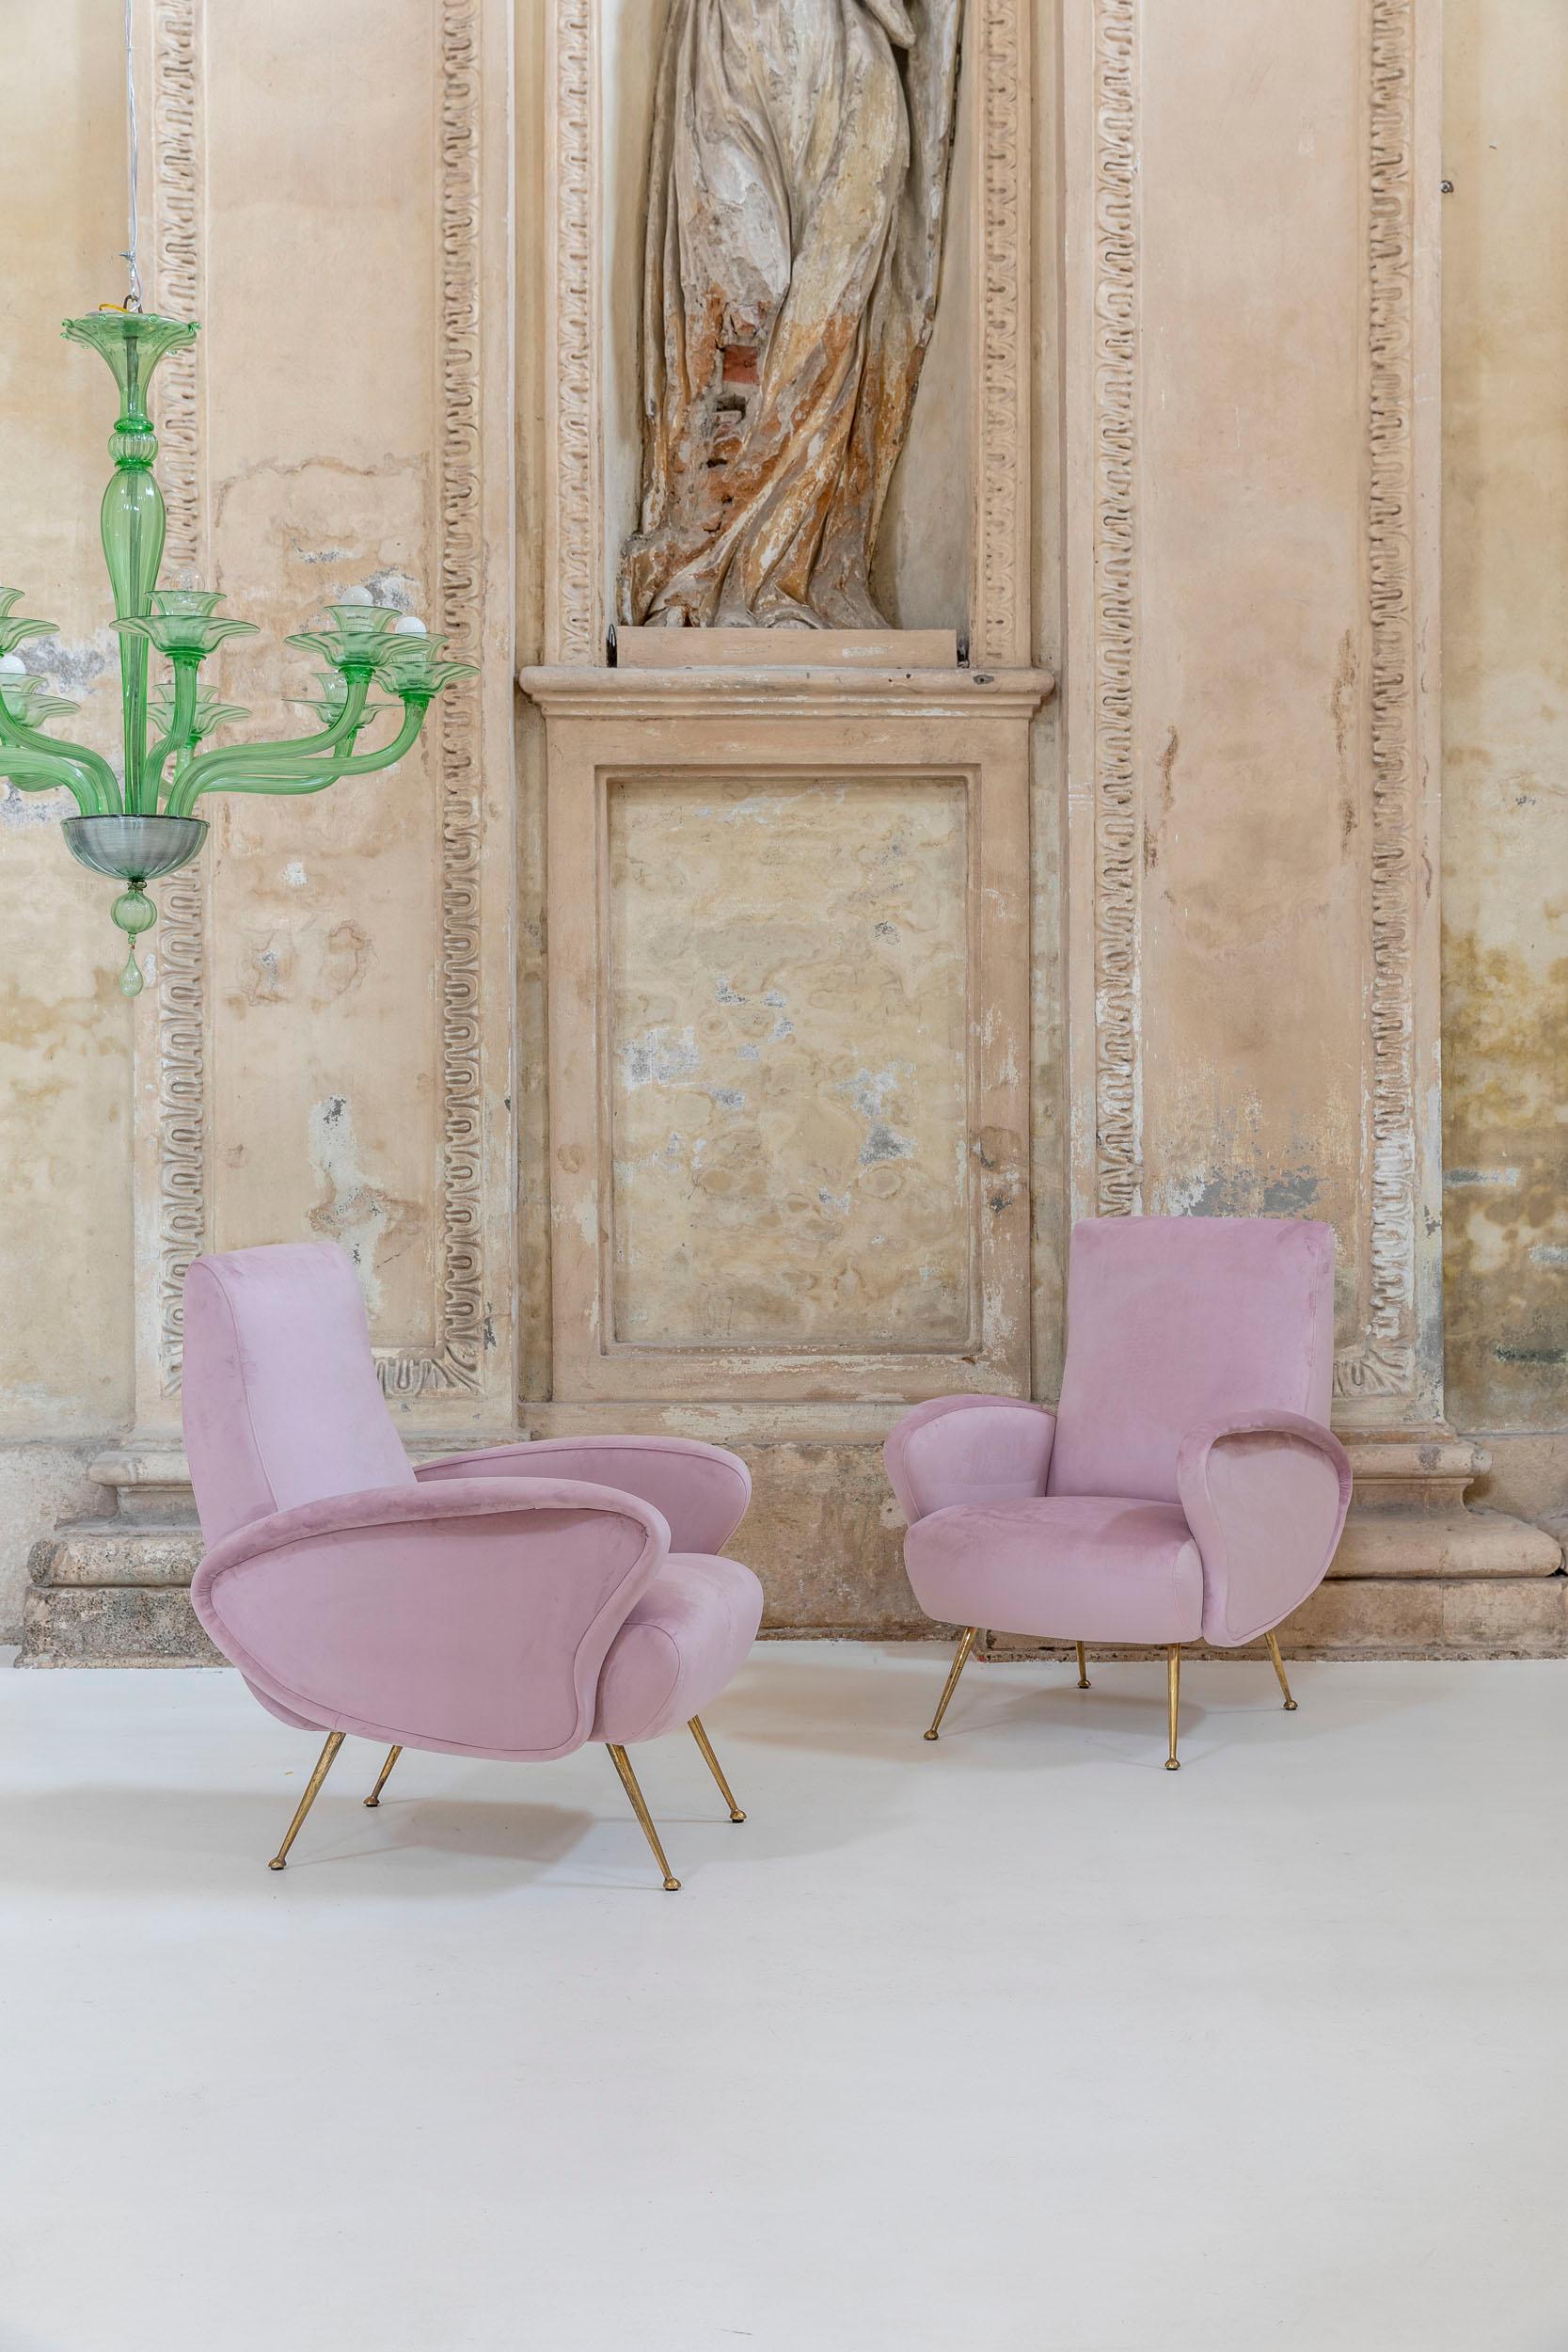 Rare pair of armchairs, elegant shape, brass legs. Very comfortable.
Newly upholstery in pink fabric.

Measures: H 35.8 in x W 26.37 in X D 28.7 in
(H 91 cm x W 67 cm x D 73 cm)
Seat Height: 16.15 in (41 cm).